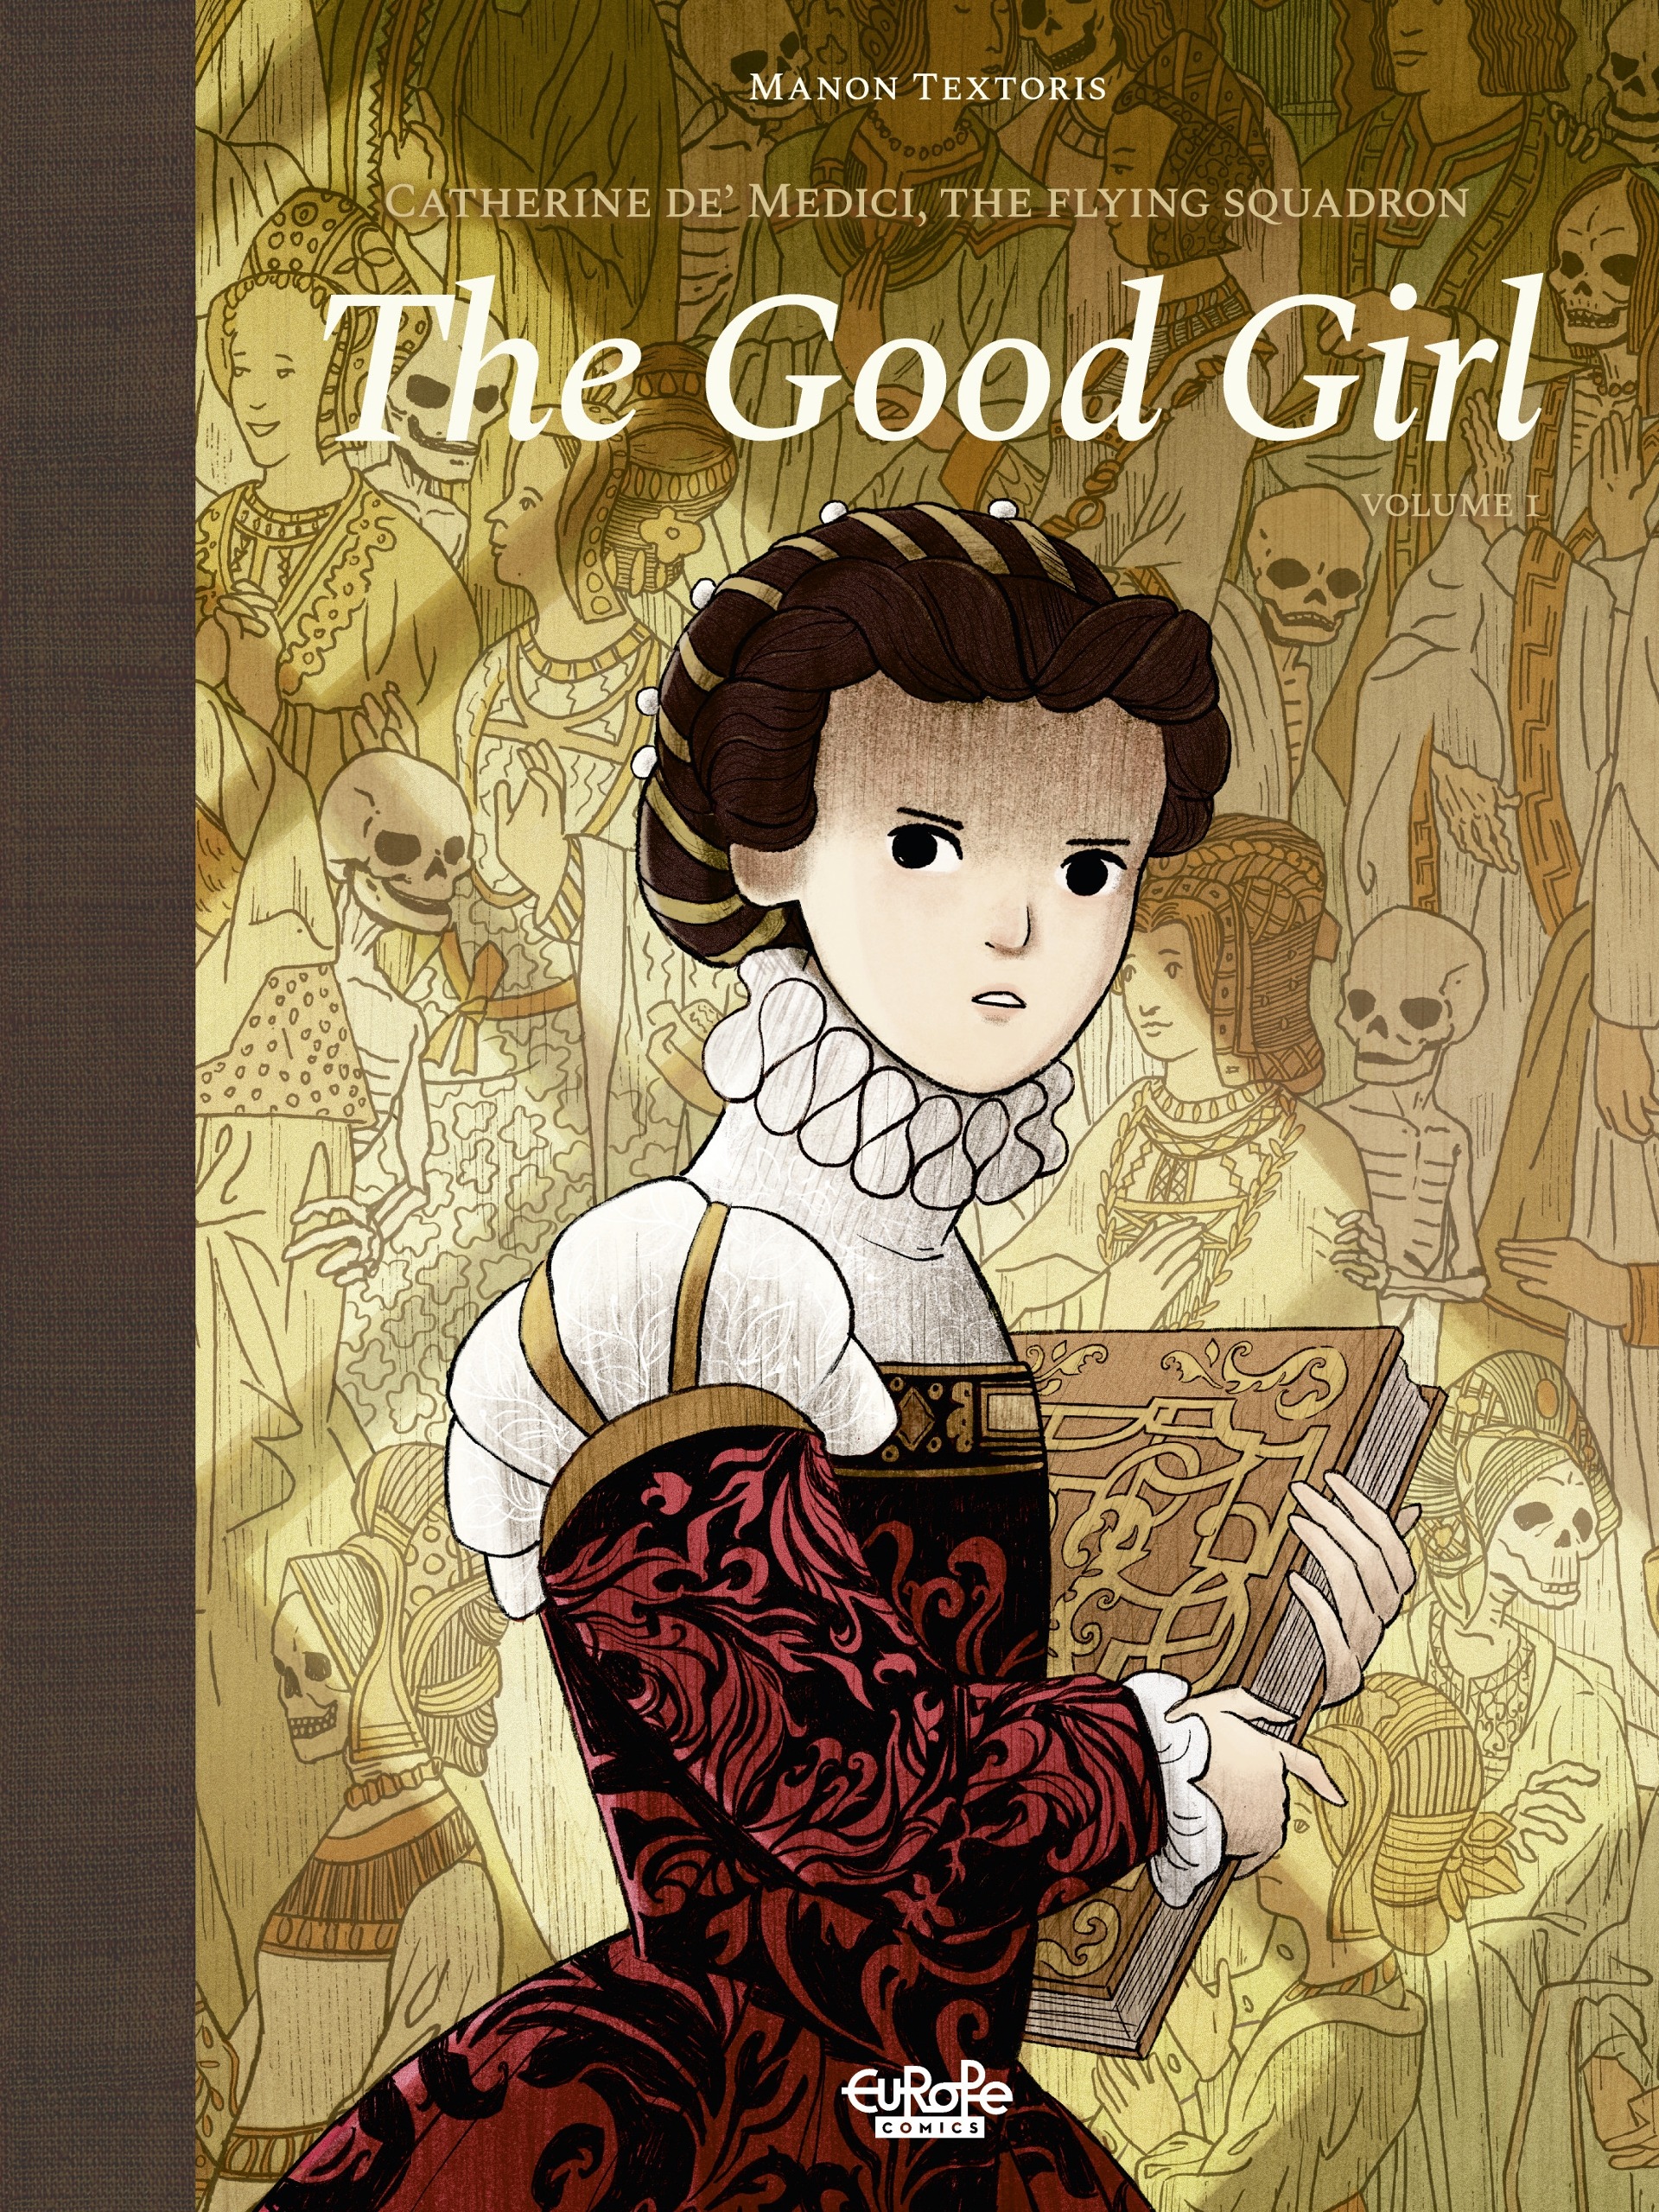 Read online Catherine de' Medici, The Flying Squadron: The Good Girl comic -  Issue # TPB - 1